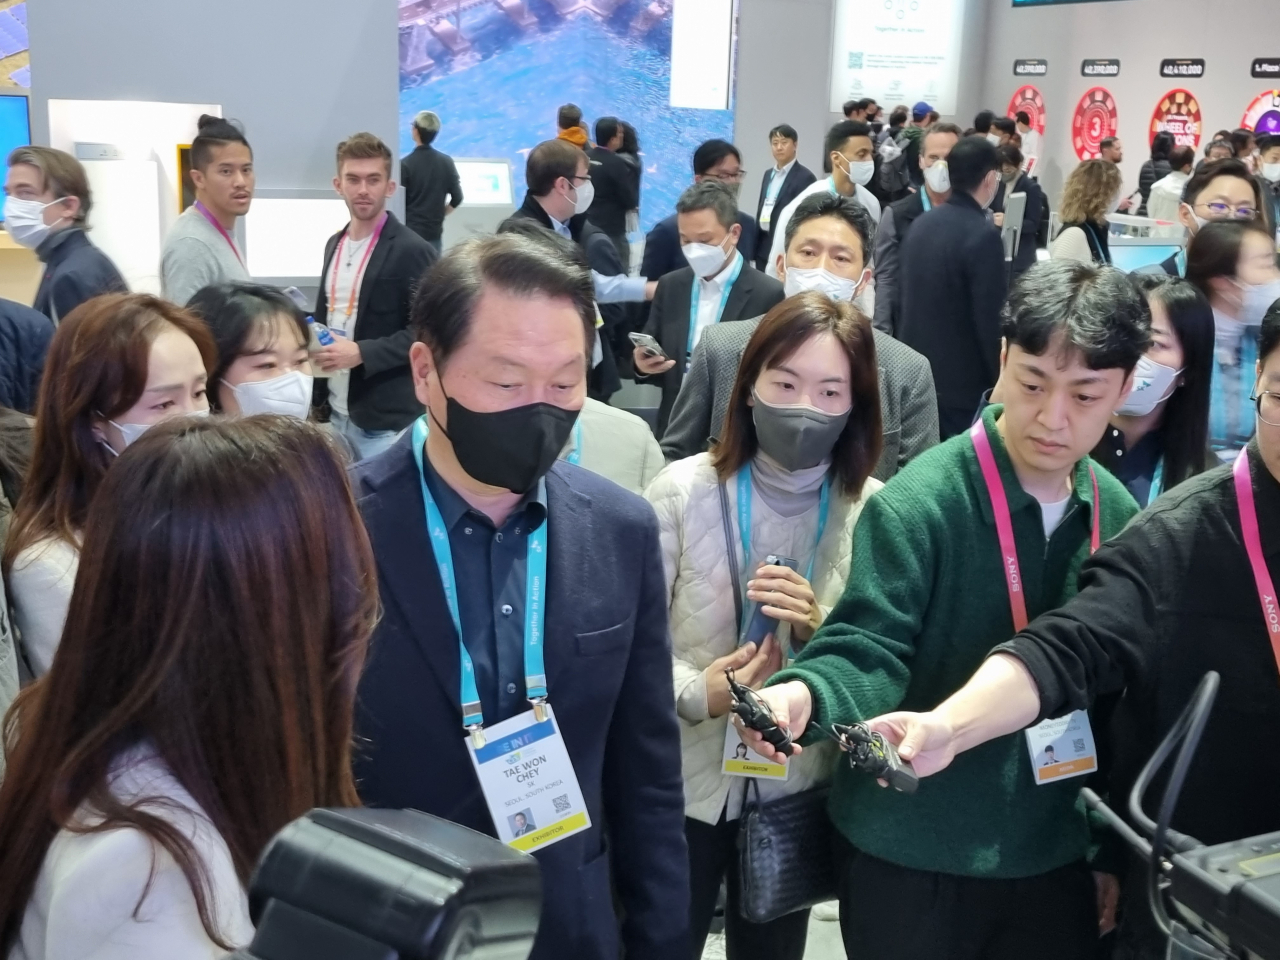 SK Group Chairman Chey Tae-won visits SK's booth at CES 2023 in Las Vegas on Friday. (Kan Hyeong-woo/The Korea Herald)